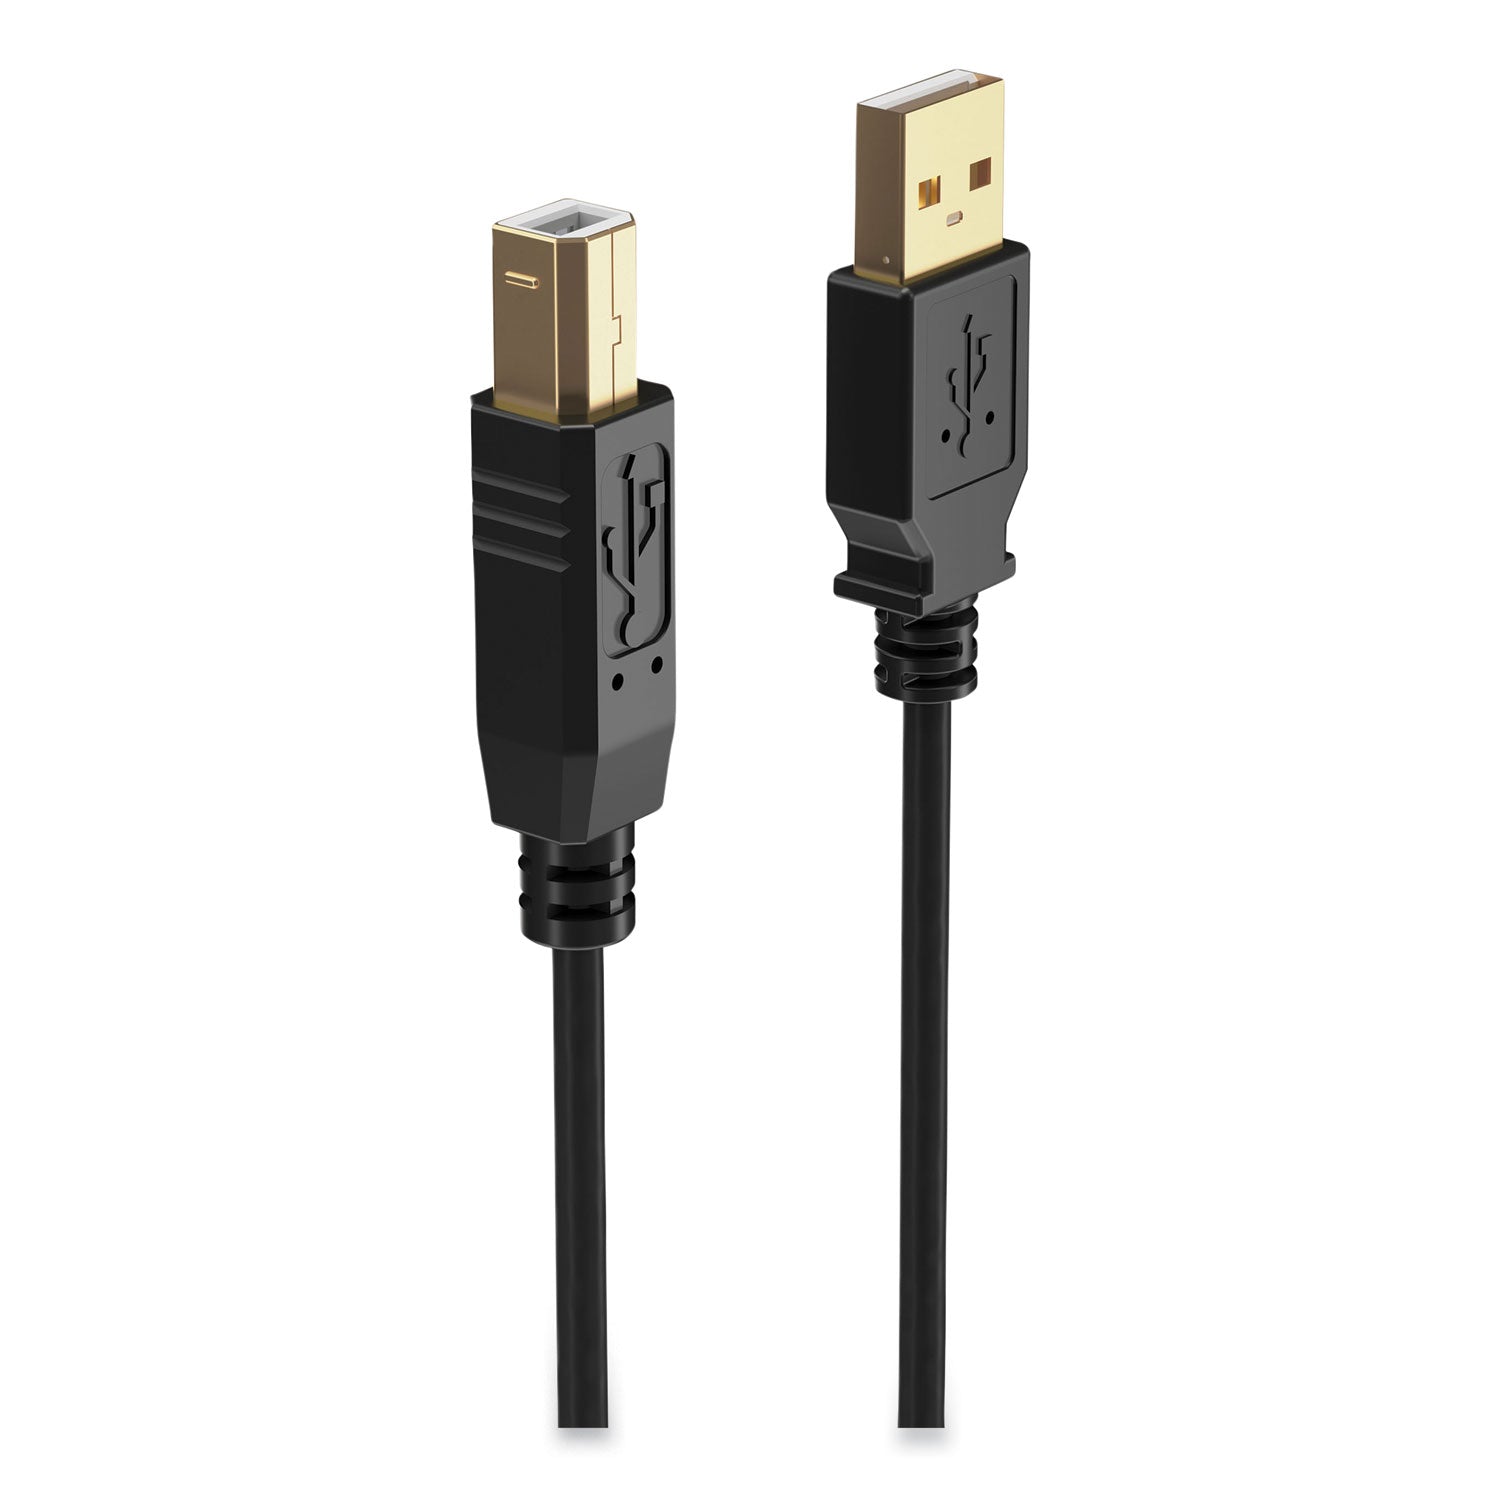 usb-printer-cable-gold-plated-connectors-11-ft-black_nxt24400015 - 2